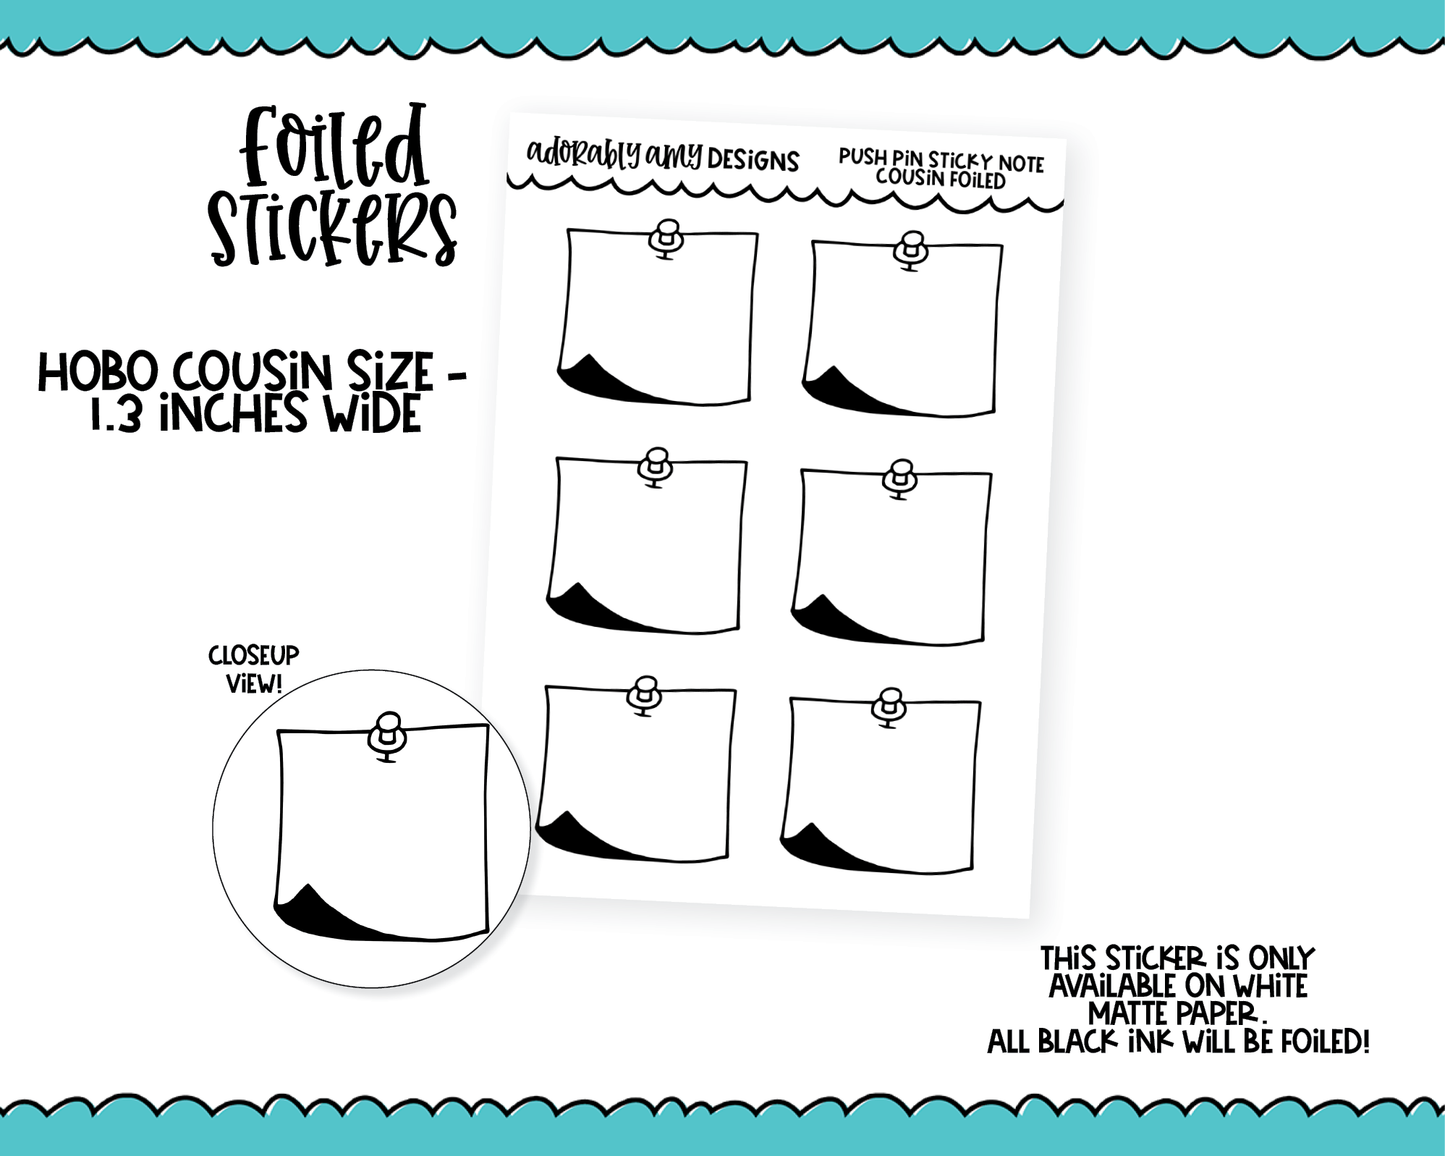 Foiled Hobo Cousin Push Pin Sticky Note Paper Boxes Planner Stickers for Hobo Cousin or any Planner or Insert